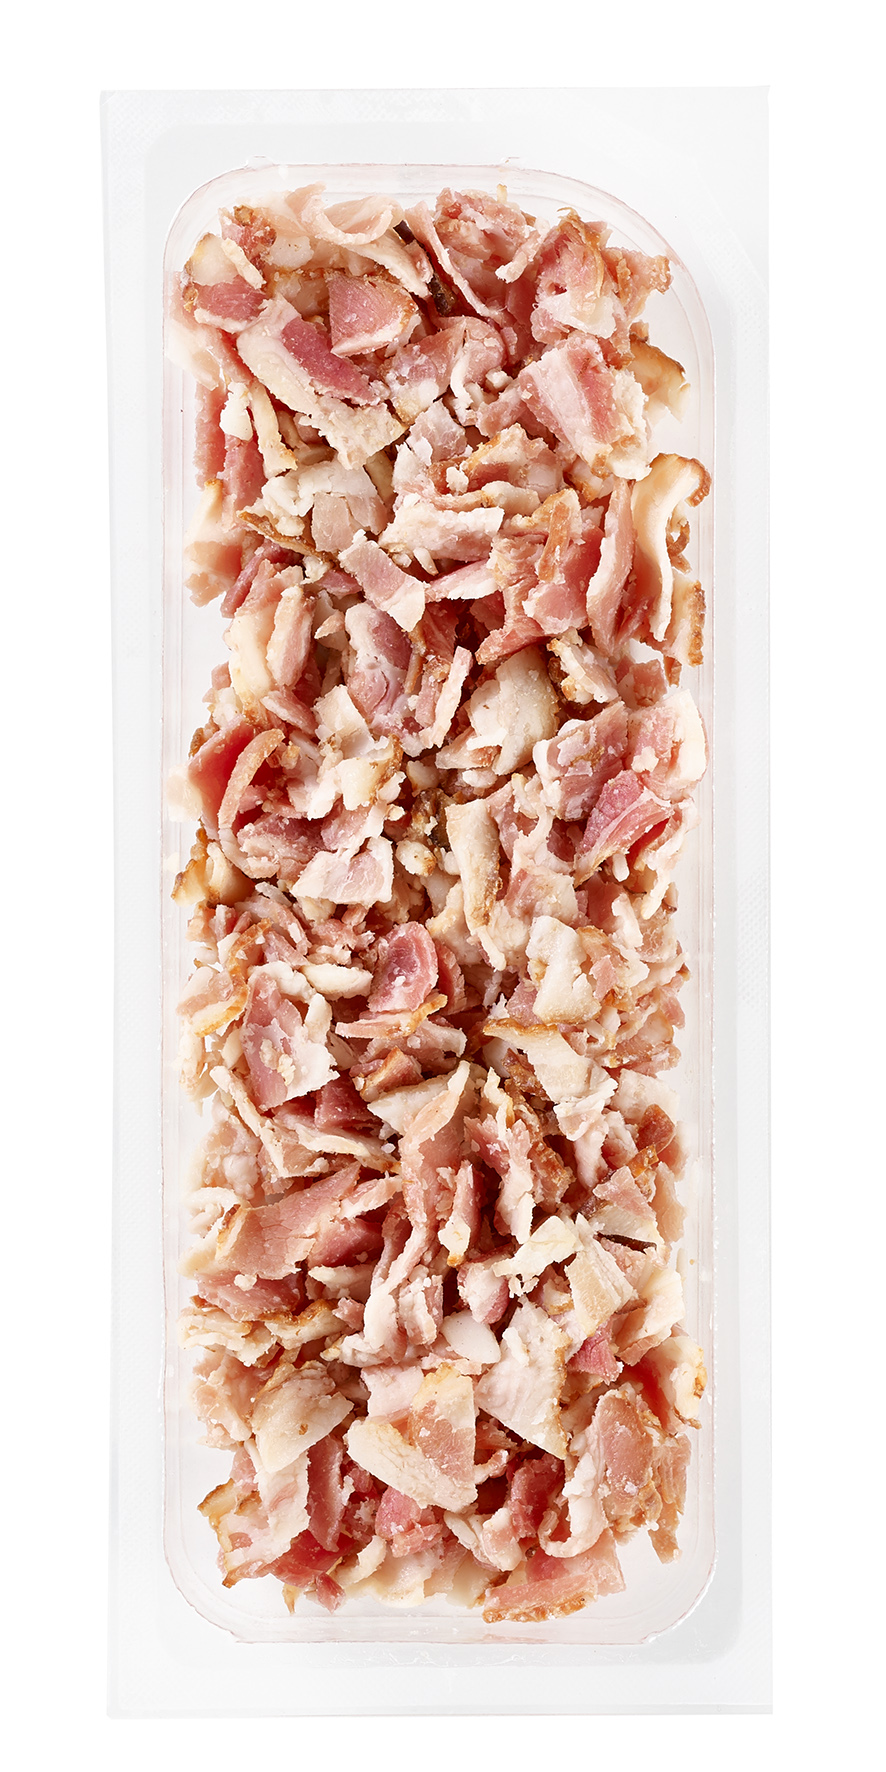 Crispy Bacon Bits package manufactured by Kaminiarz